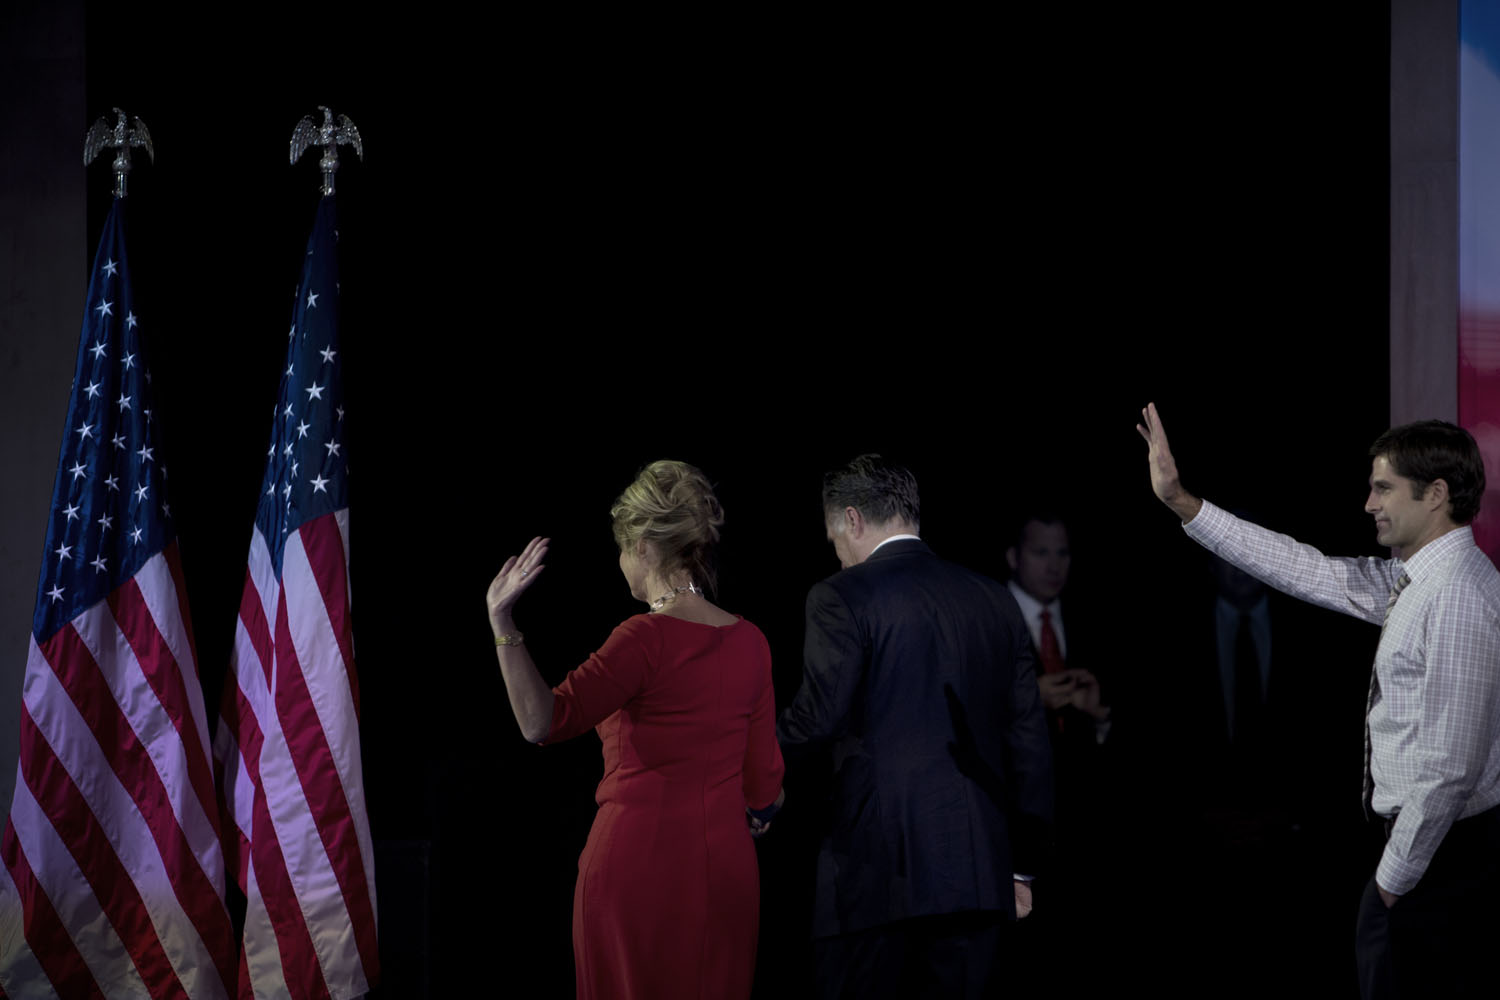 Image: Nov. 6, 2012. Mitt Romney and his supporters on Election Night at the Boston Convention Center.